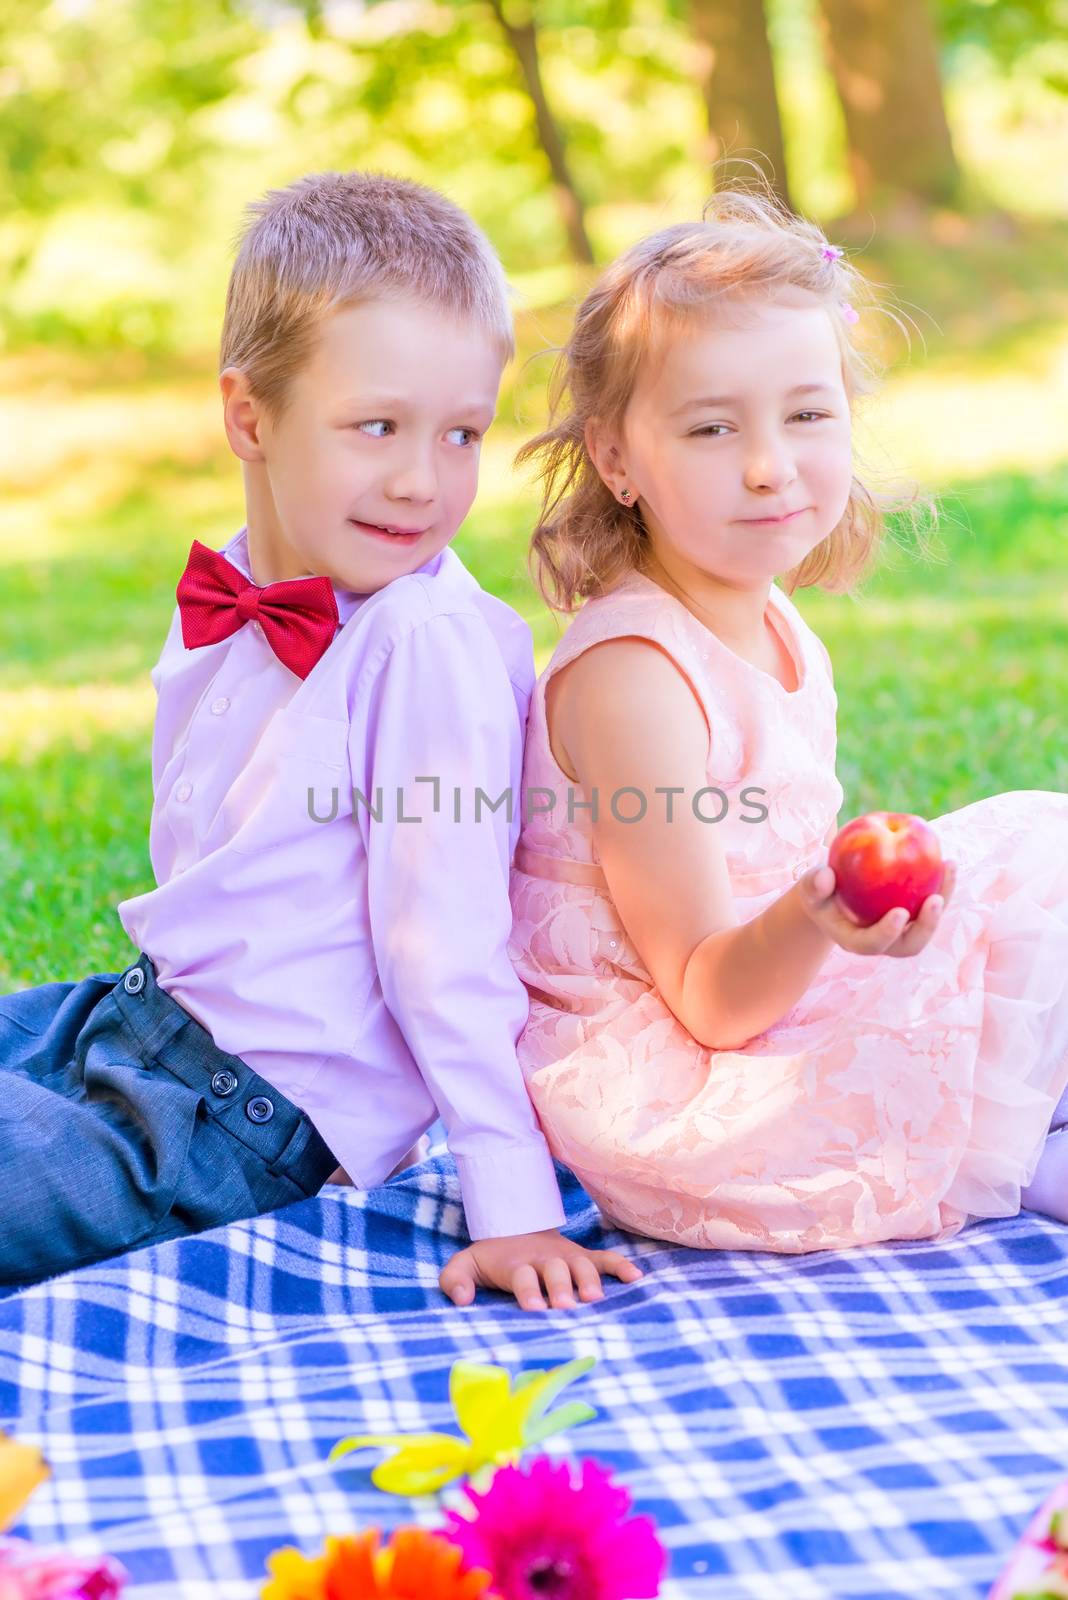 Vertical portrait of a six-year old couple at a picnic in the park